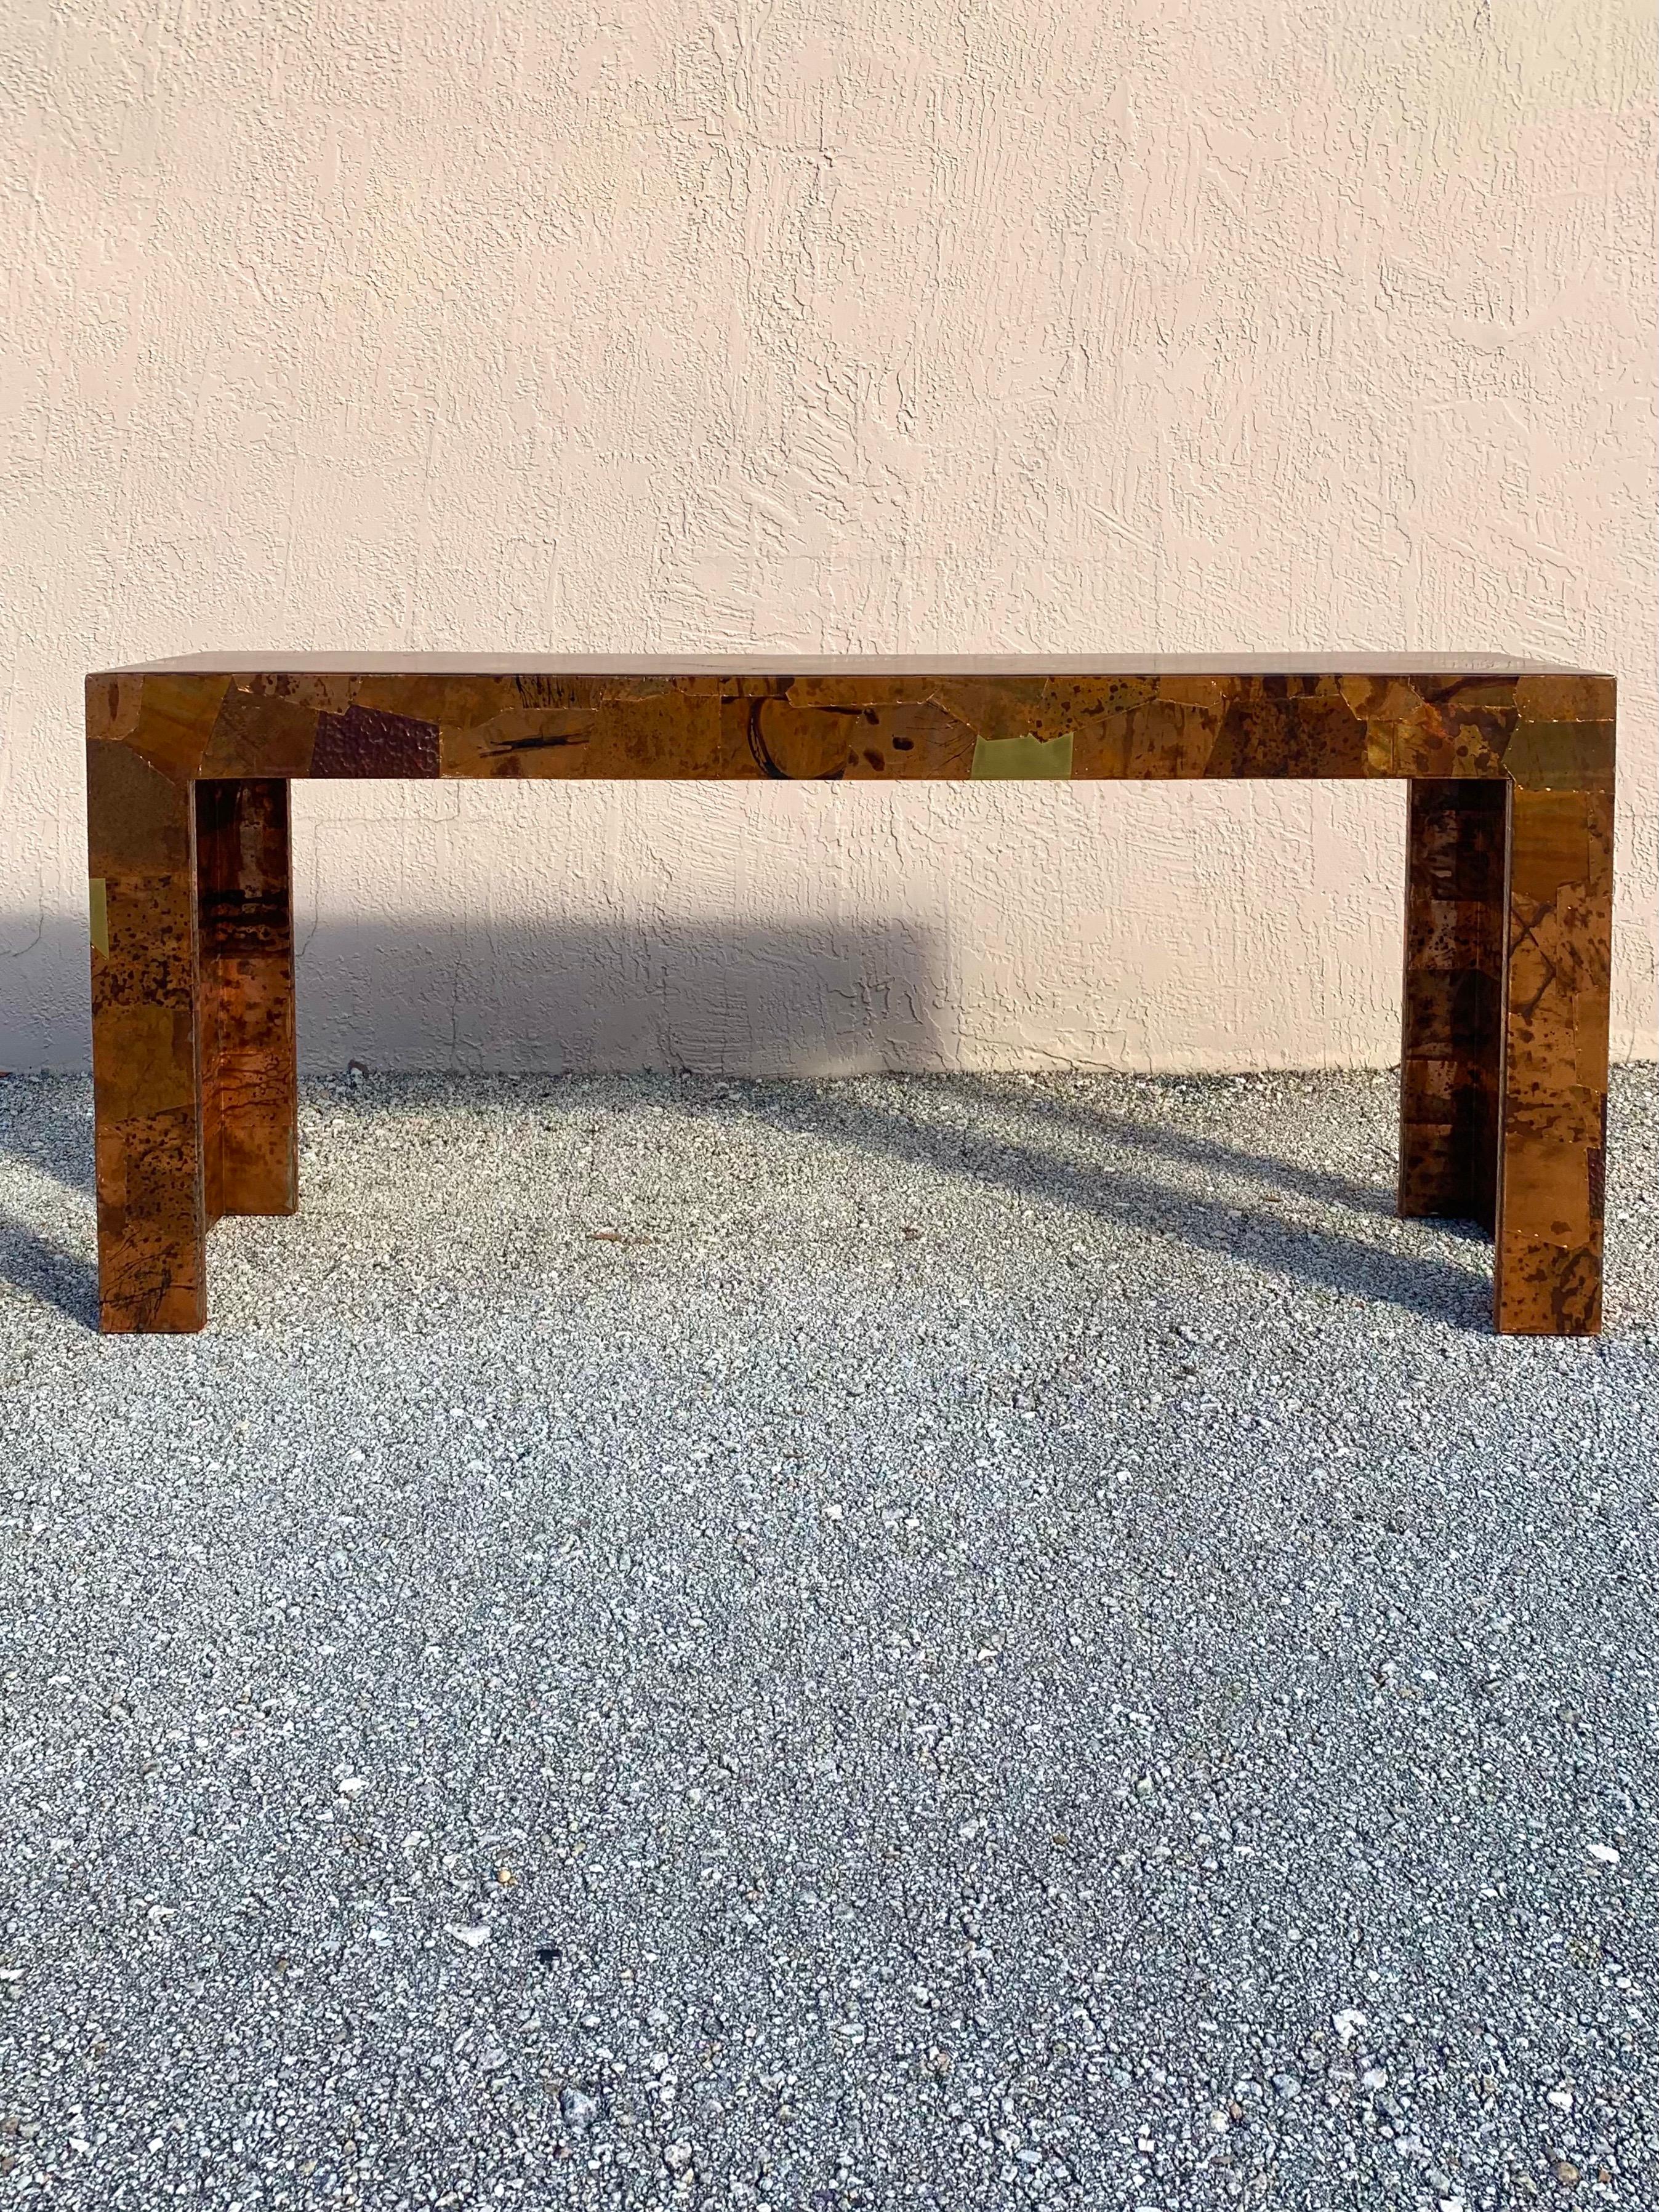 Studio made copper and brass console table. Made to have a brutalist flair the artist used different pieces of textured and patinated copper and clean brass to cover the entire console table. The plates are affixed with copper staples then covered